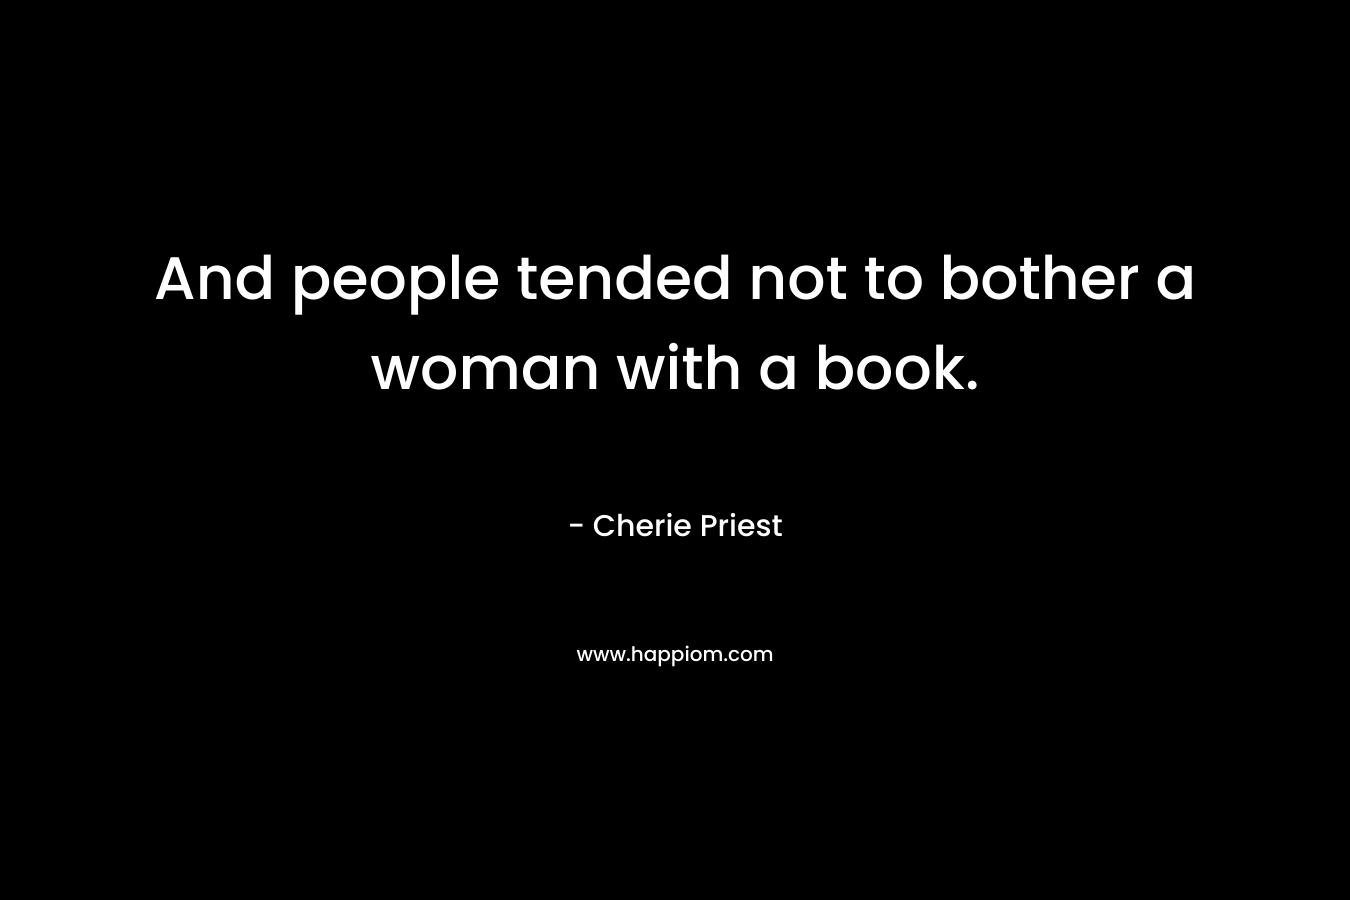 And people tended not to bother a woman with a book. – Cherie Priest